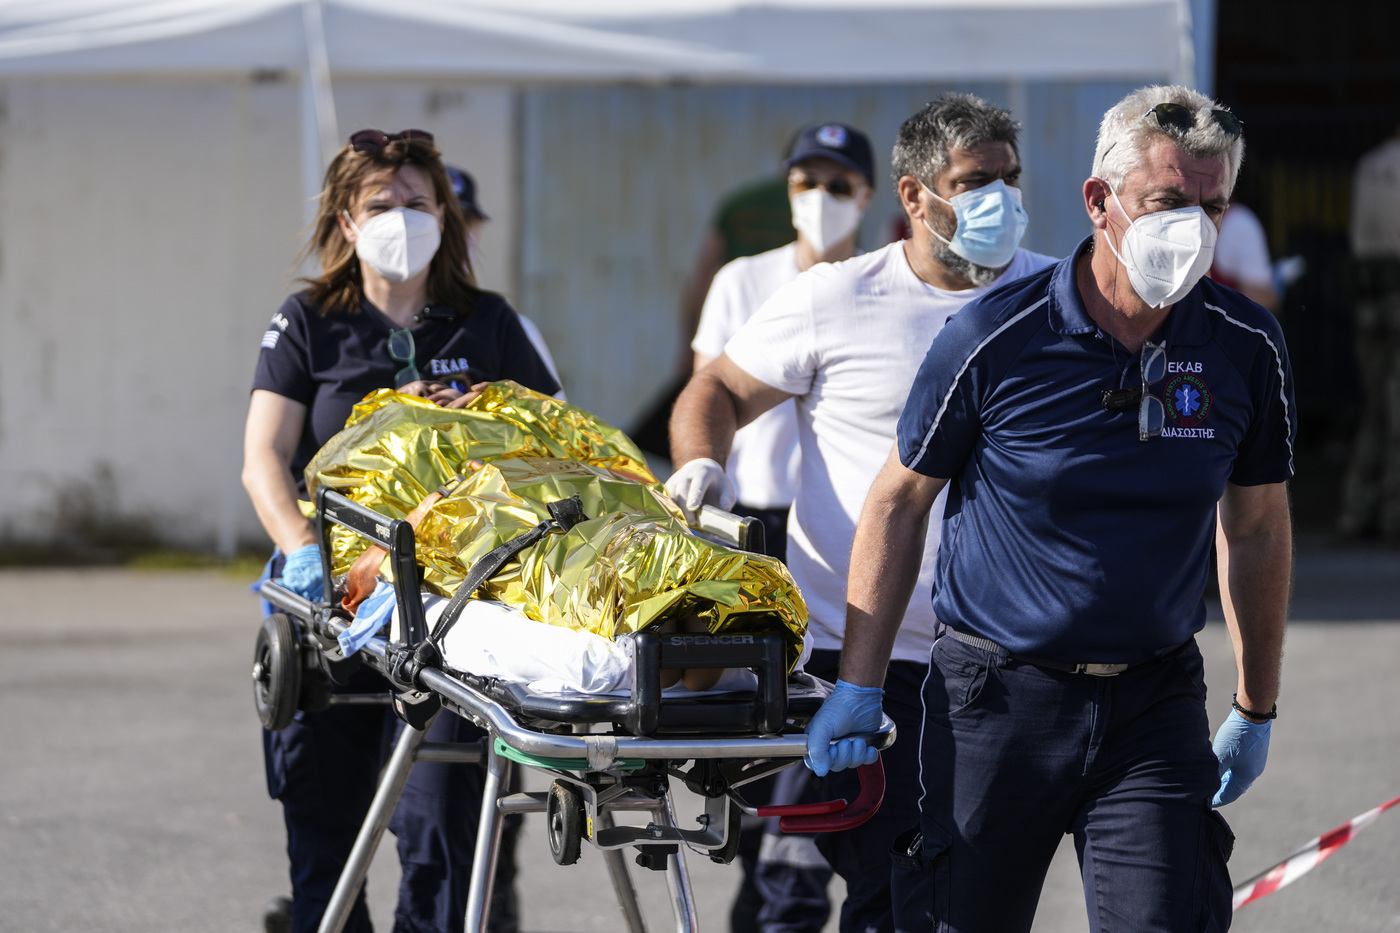 Paramedics carry an injured survivor of a shipwreck to an ambulance at the port in Kalamata town, about 240 kilometers (150miles) southwest of Athens on Wednesday, June 14, 2023. A fishing boat carrying migrants trying to reach Europe capsized and sank off Greece on Wednesday, authorities said, leaving at least 79 dead and many more missing in one of the worst disasters of its kind this year. (AP Photos/Thanassis Stavrakis)